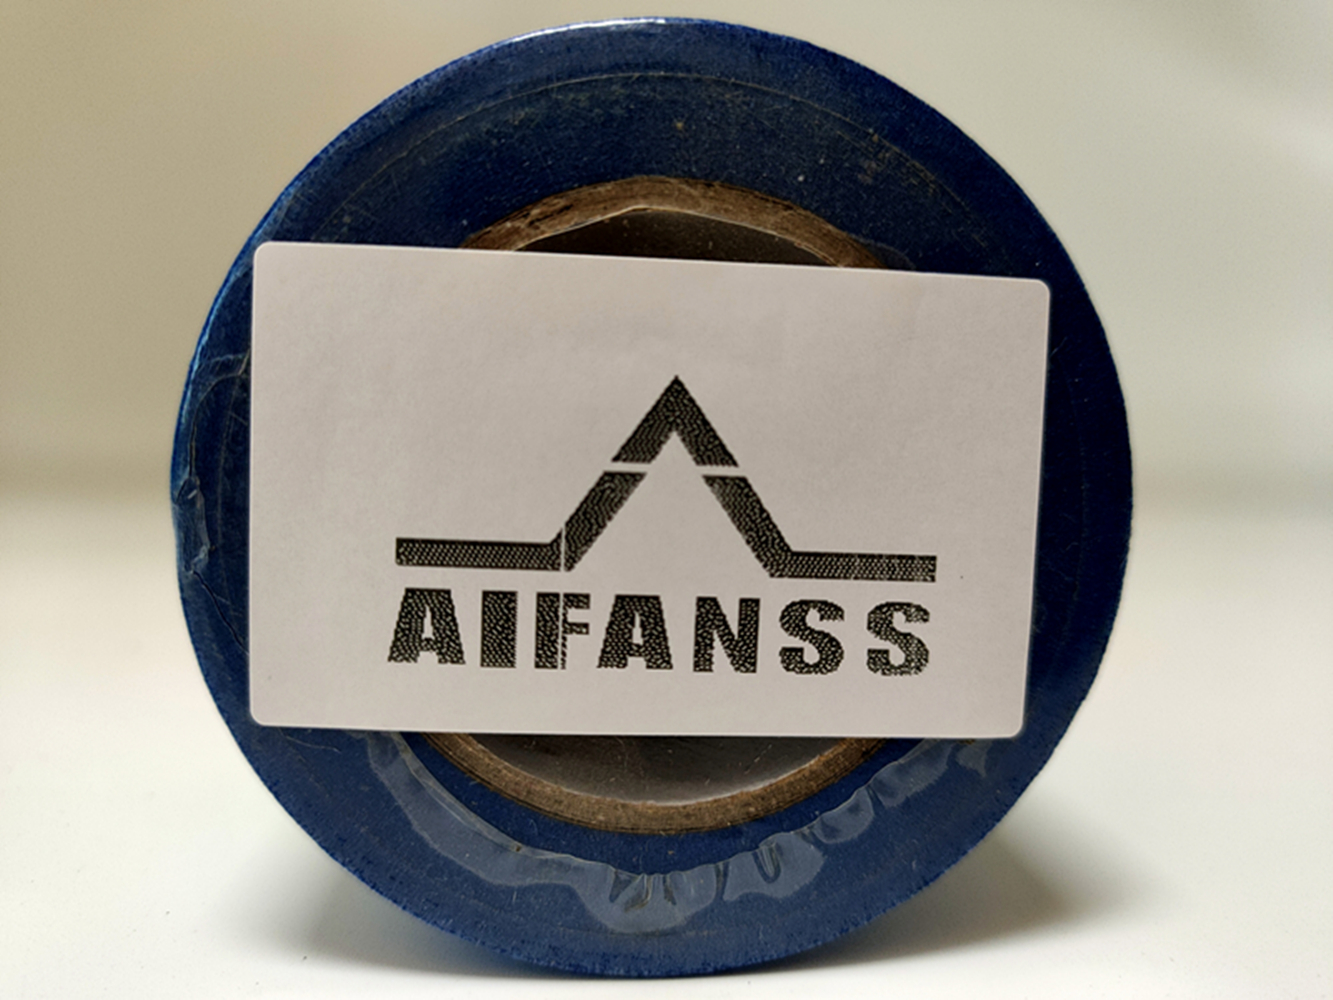 AIFANSS Gummed Tape For Stationery Use,Painters Tape Colorful Craft Art Paper Tape for Kids Labeling Arts Crafts DIY Decorative Coding Decoration Teaching Supplies